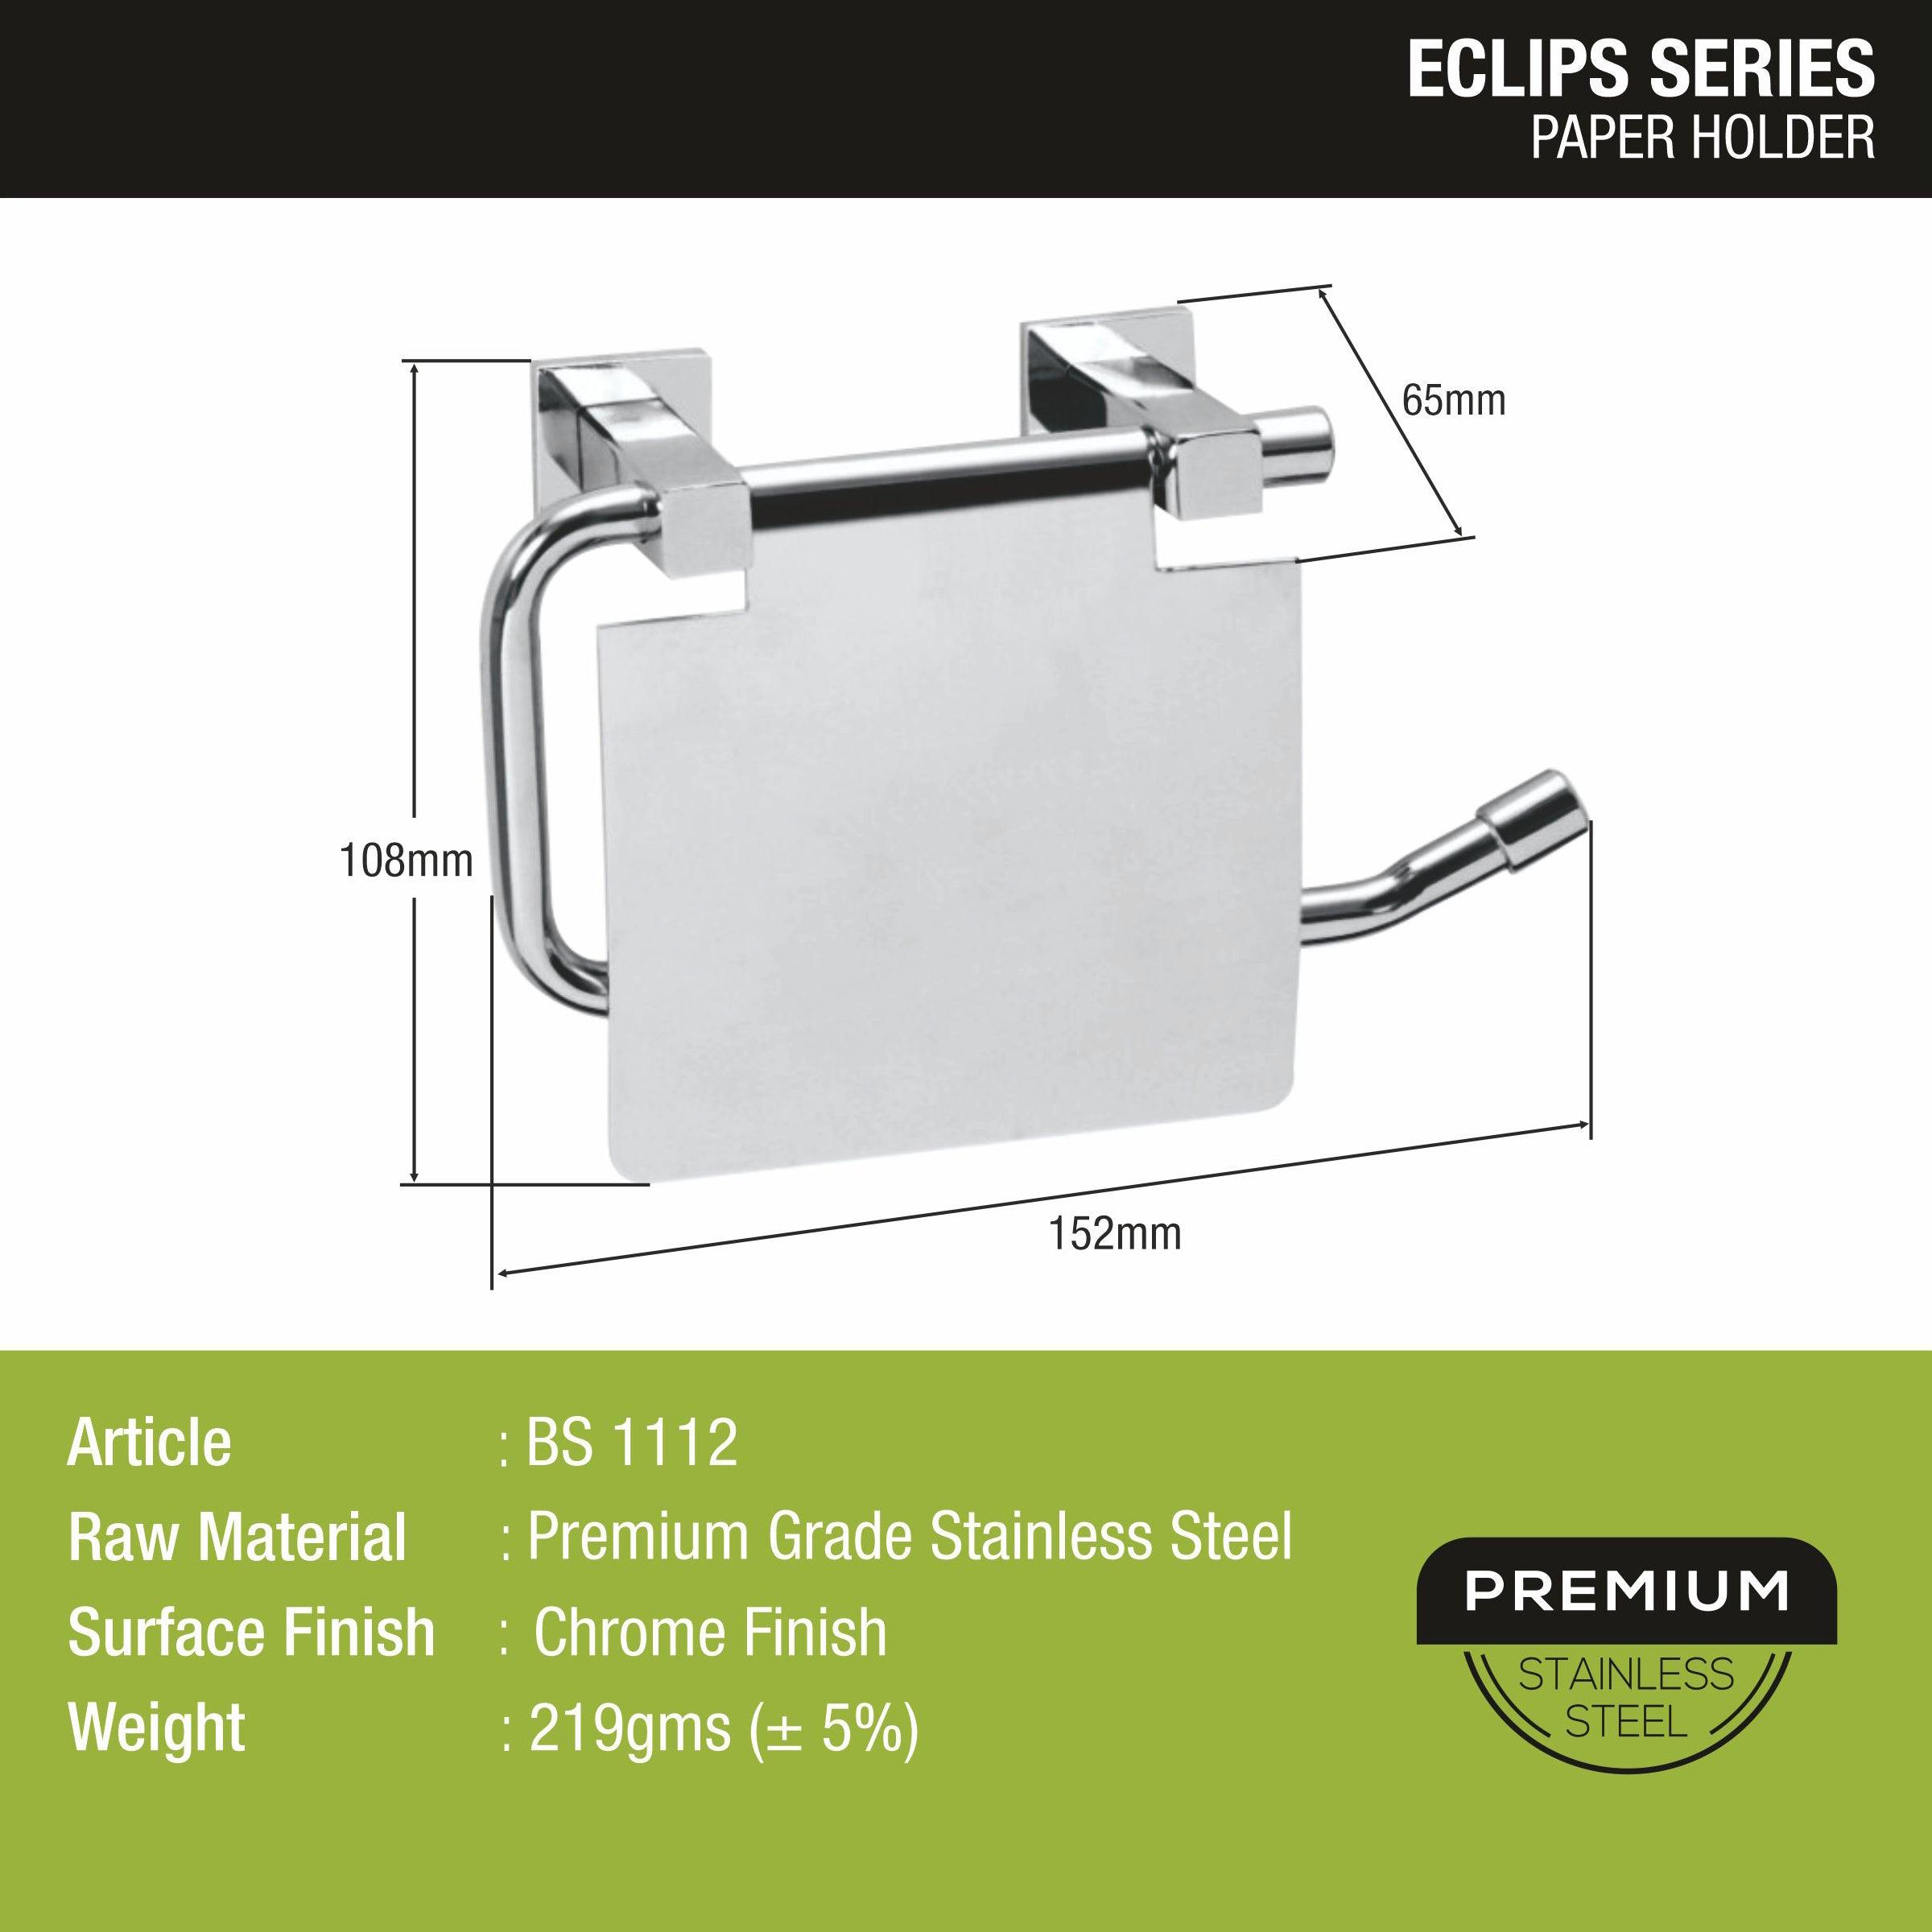 Eclipse Paper Holder size and dimension